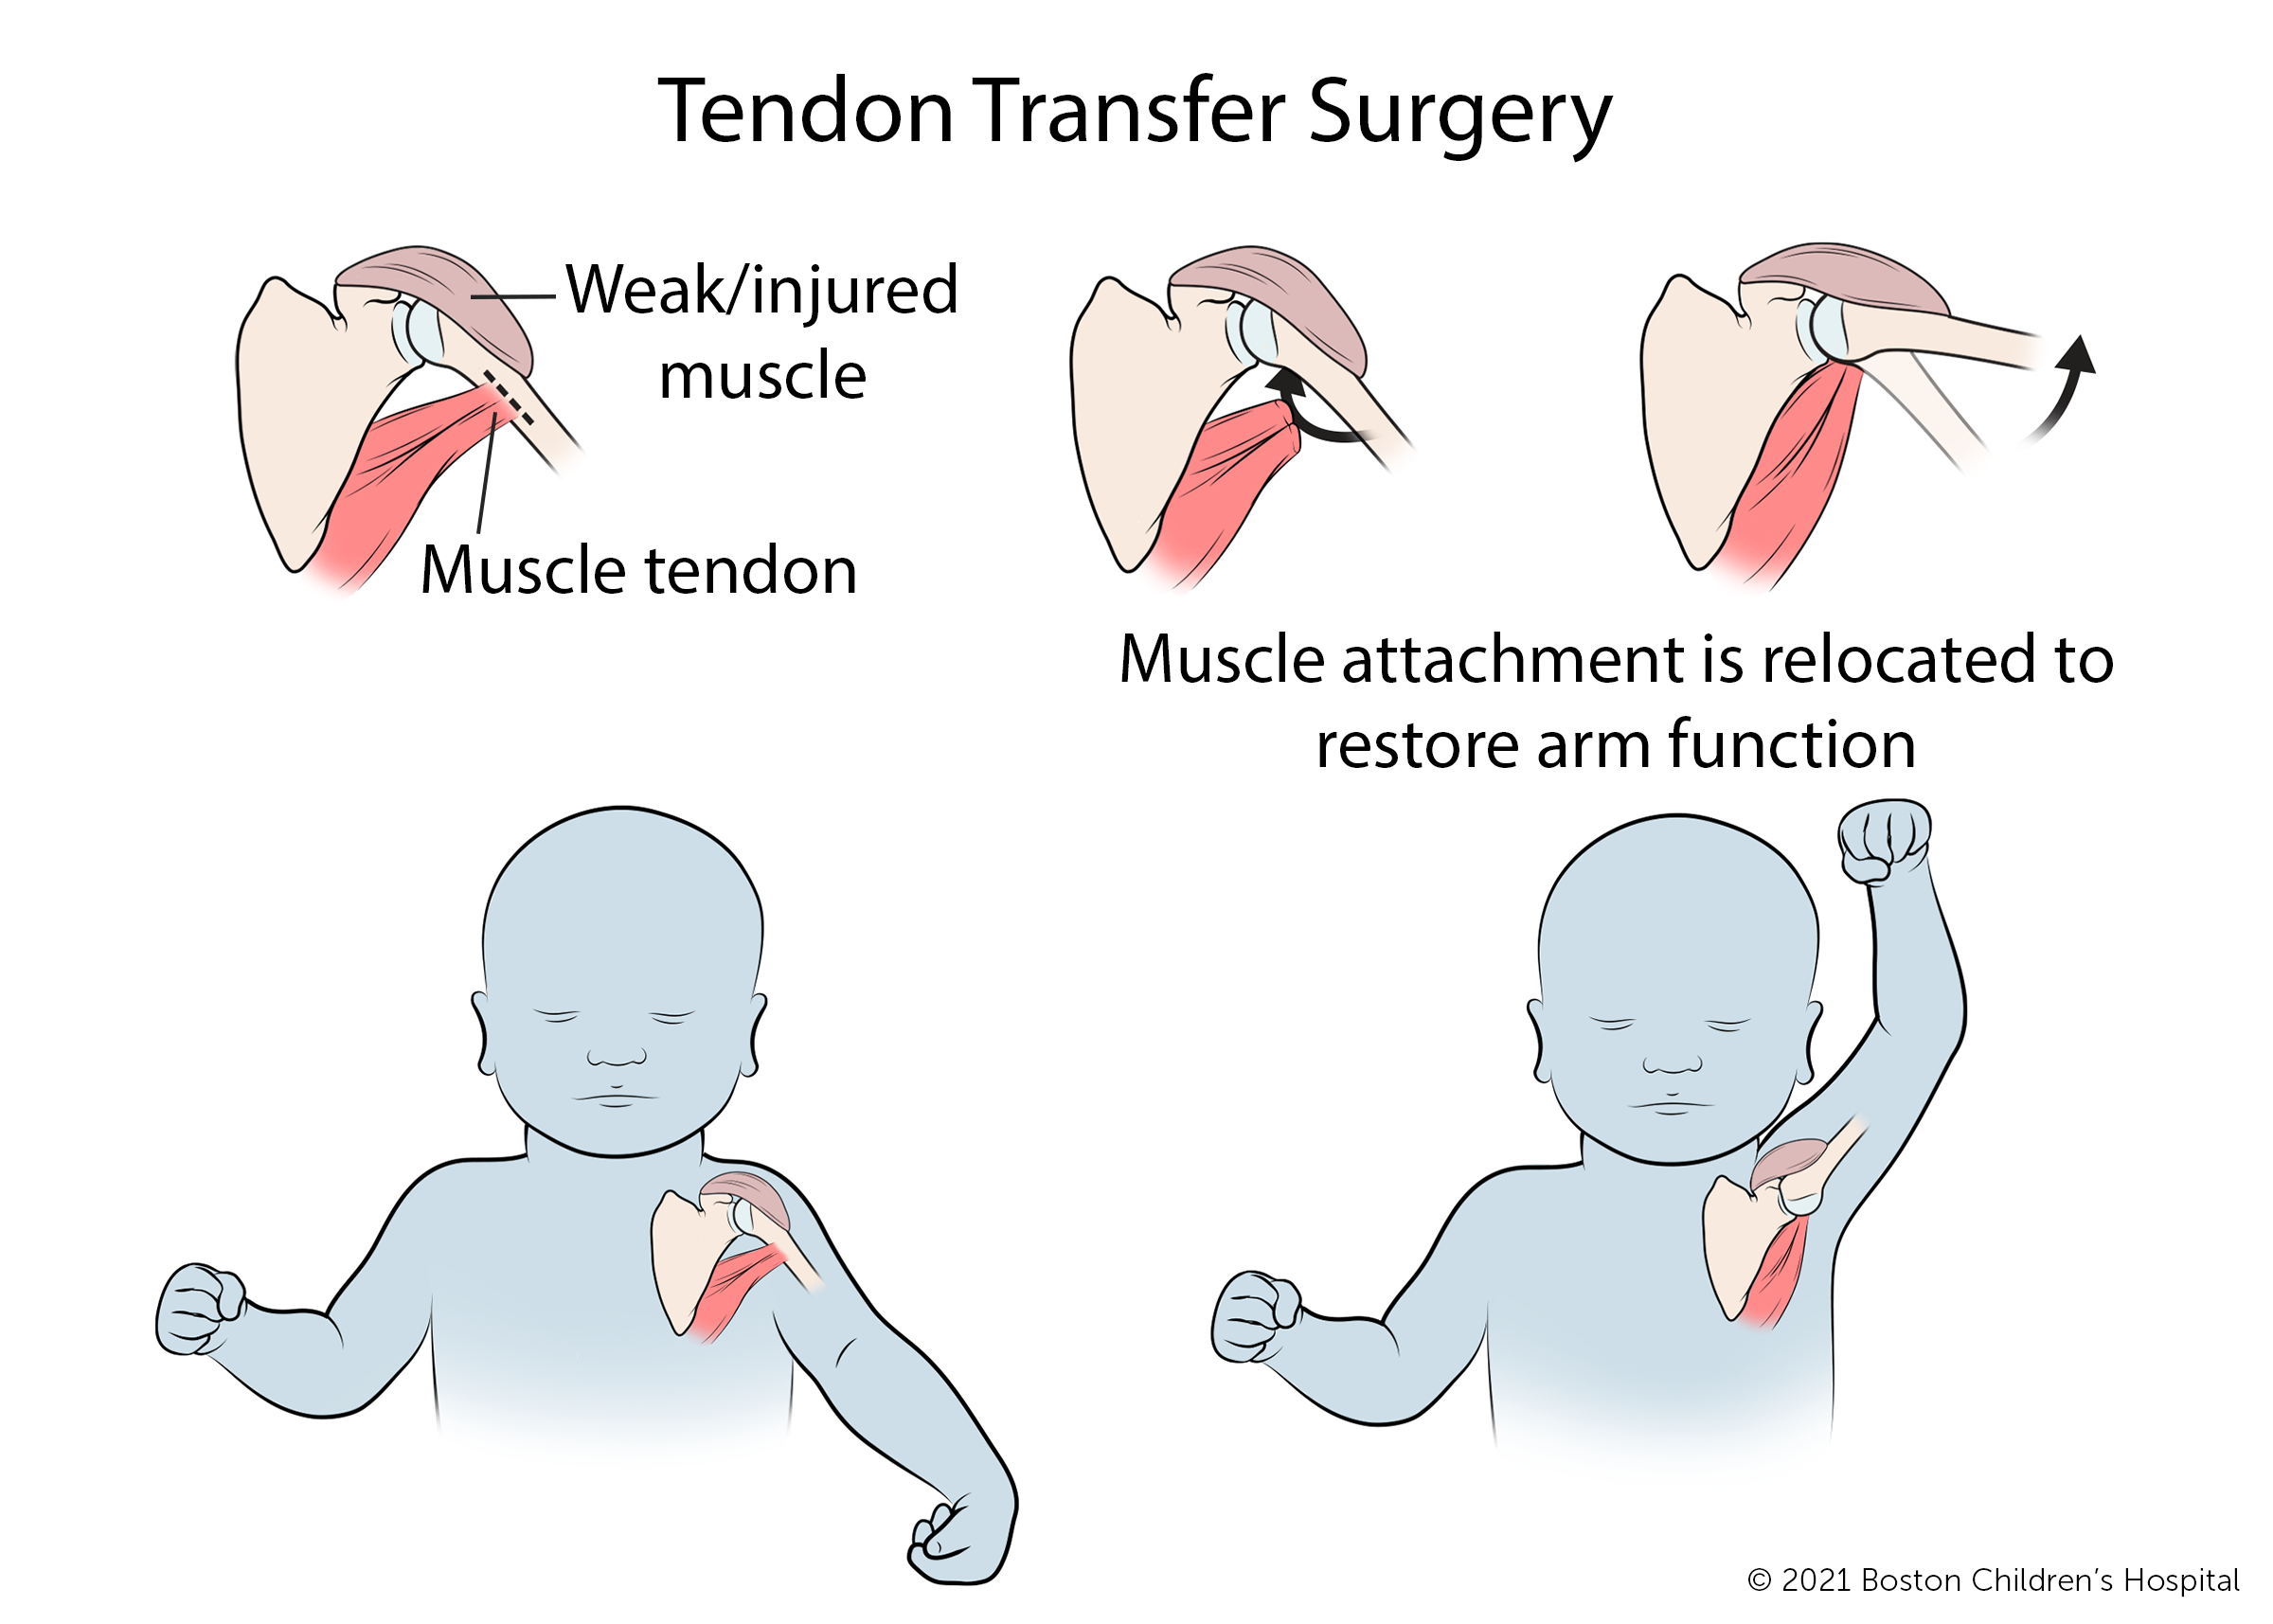 For tendon transfer surgery, the tendon of the weak or injured muscle is separated from its normal attachment point and reattached in a new location to restore arm function.